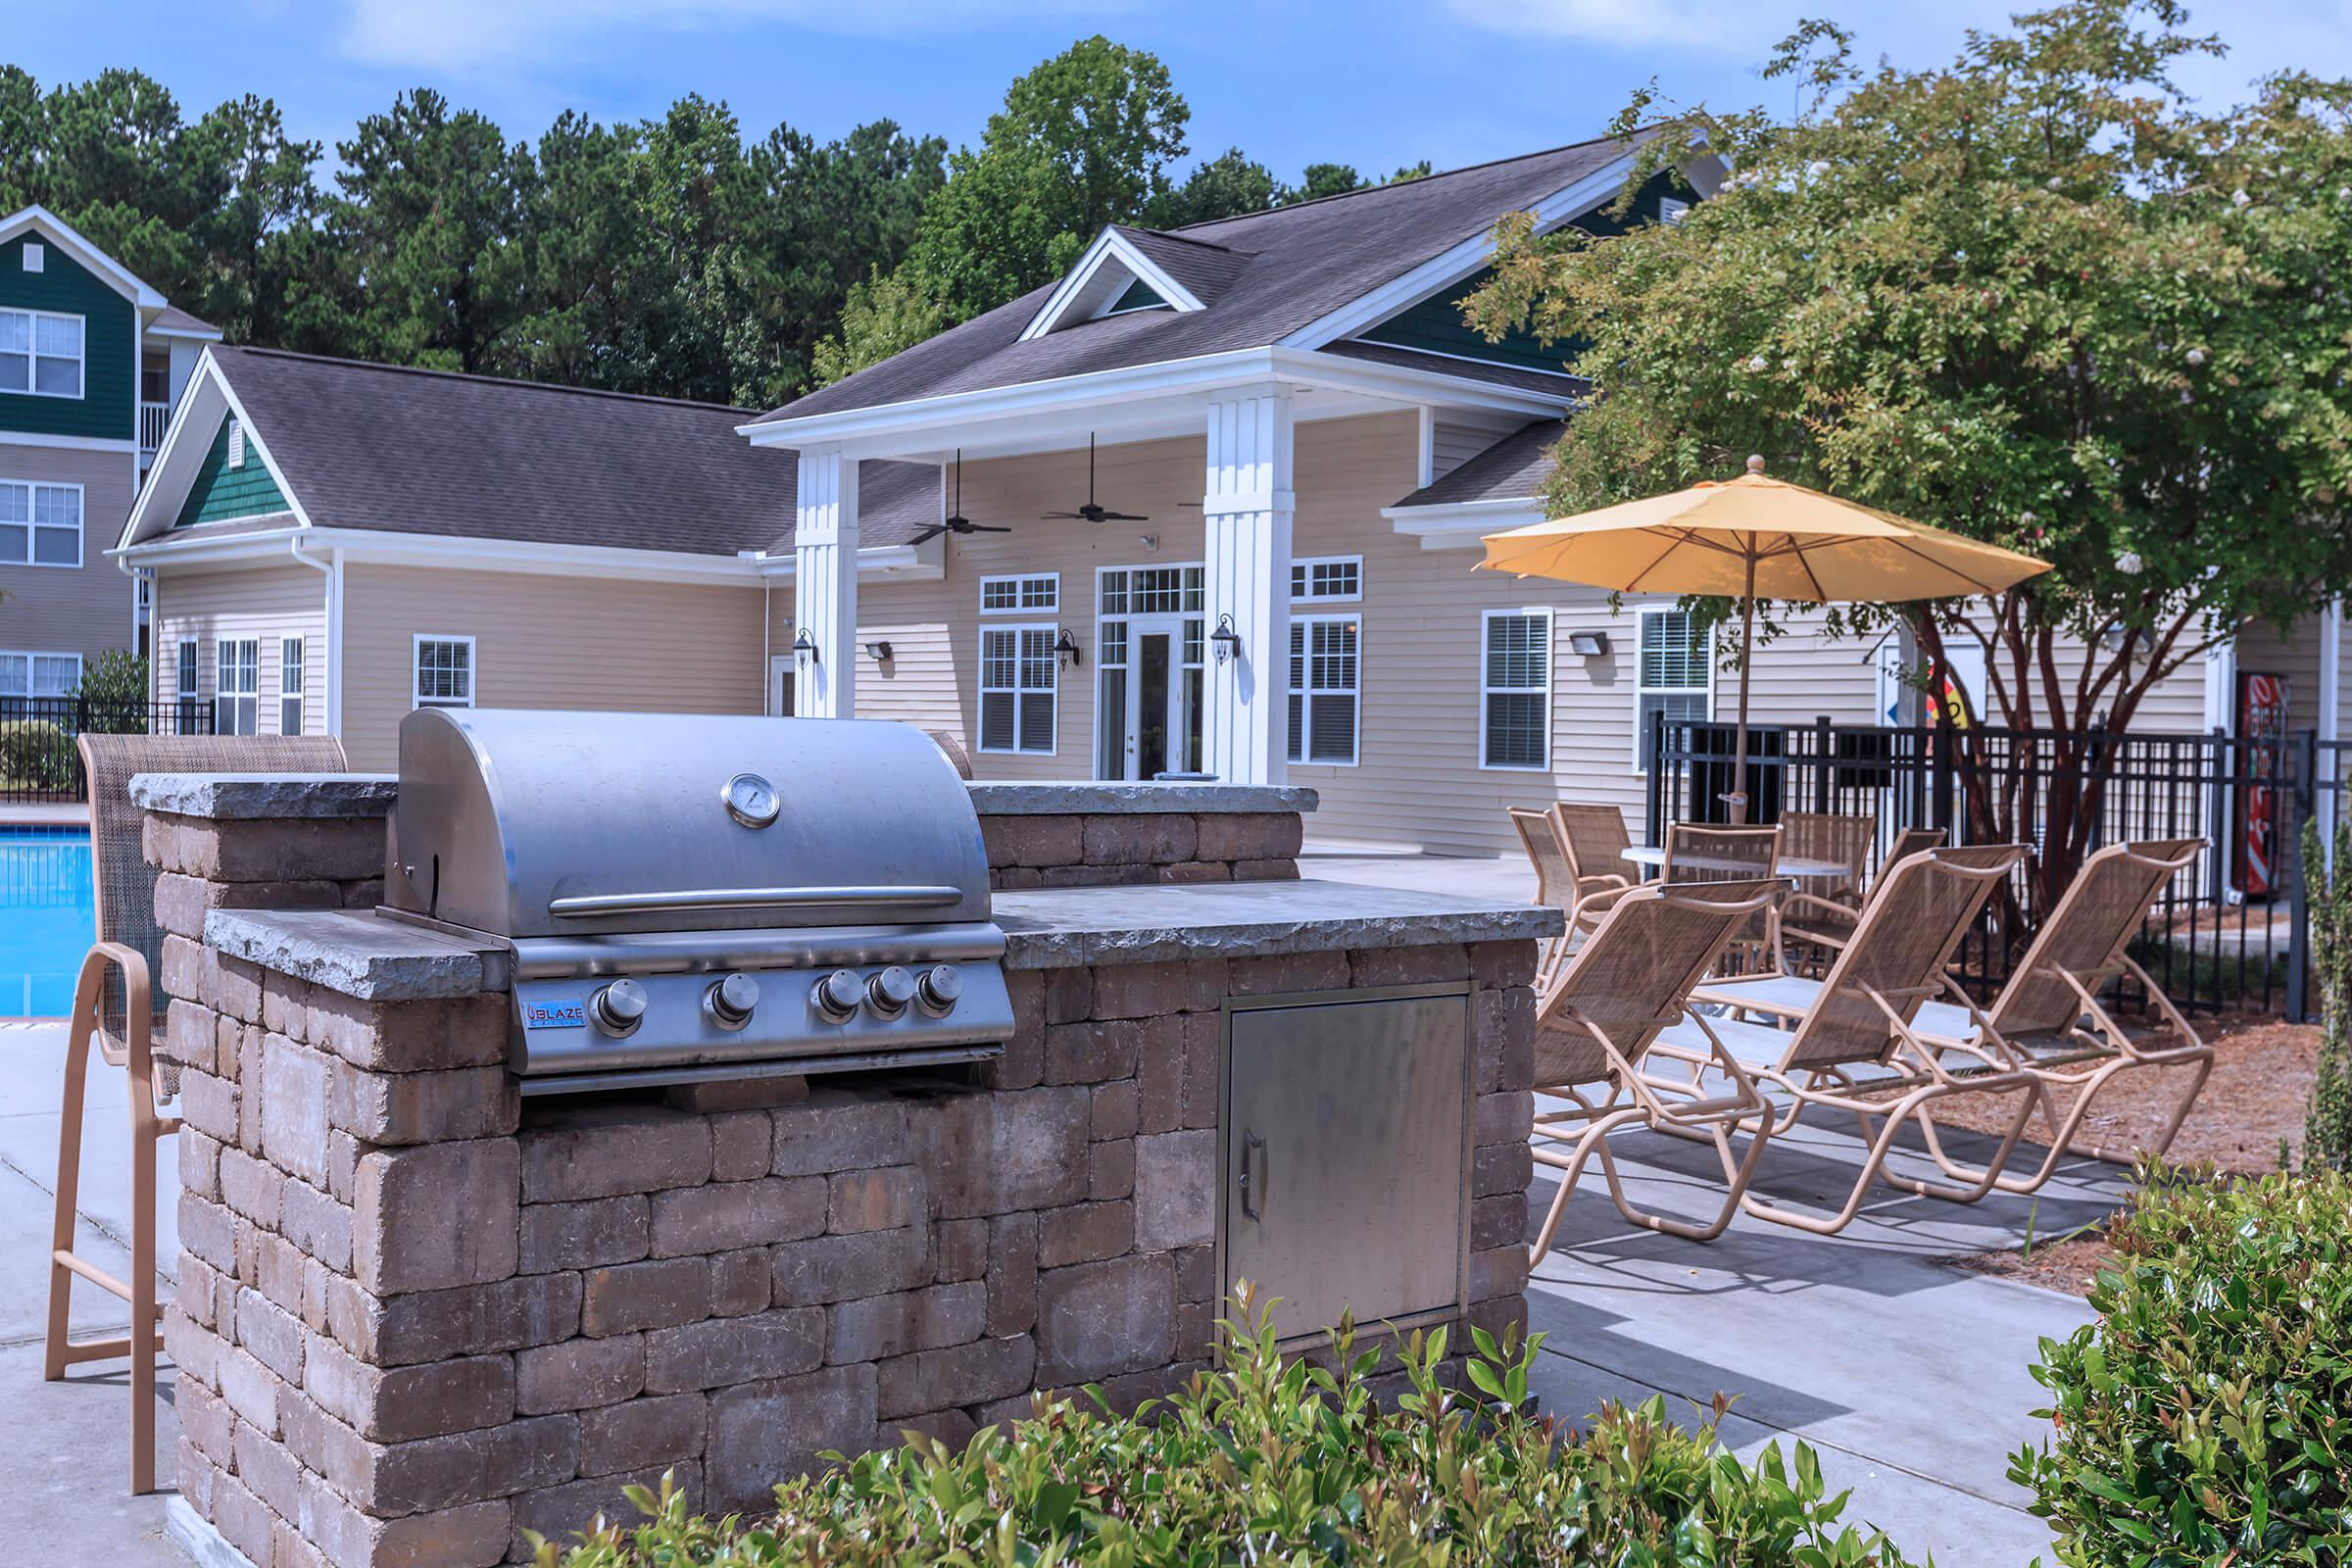 Barbecue Grills Here At Cooper's Ridge in Ladson, South Carolina